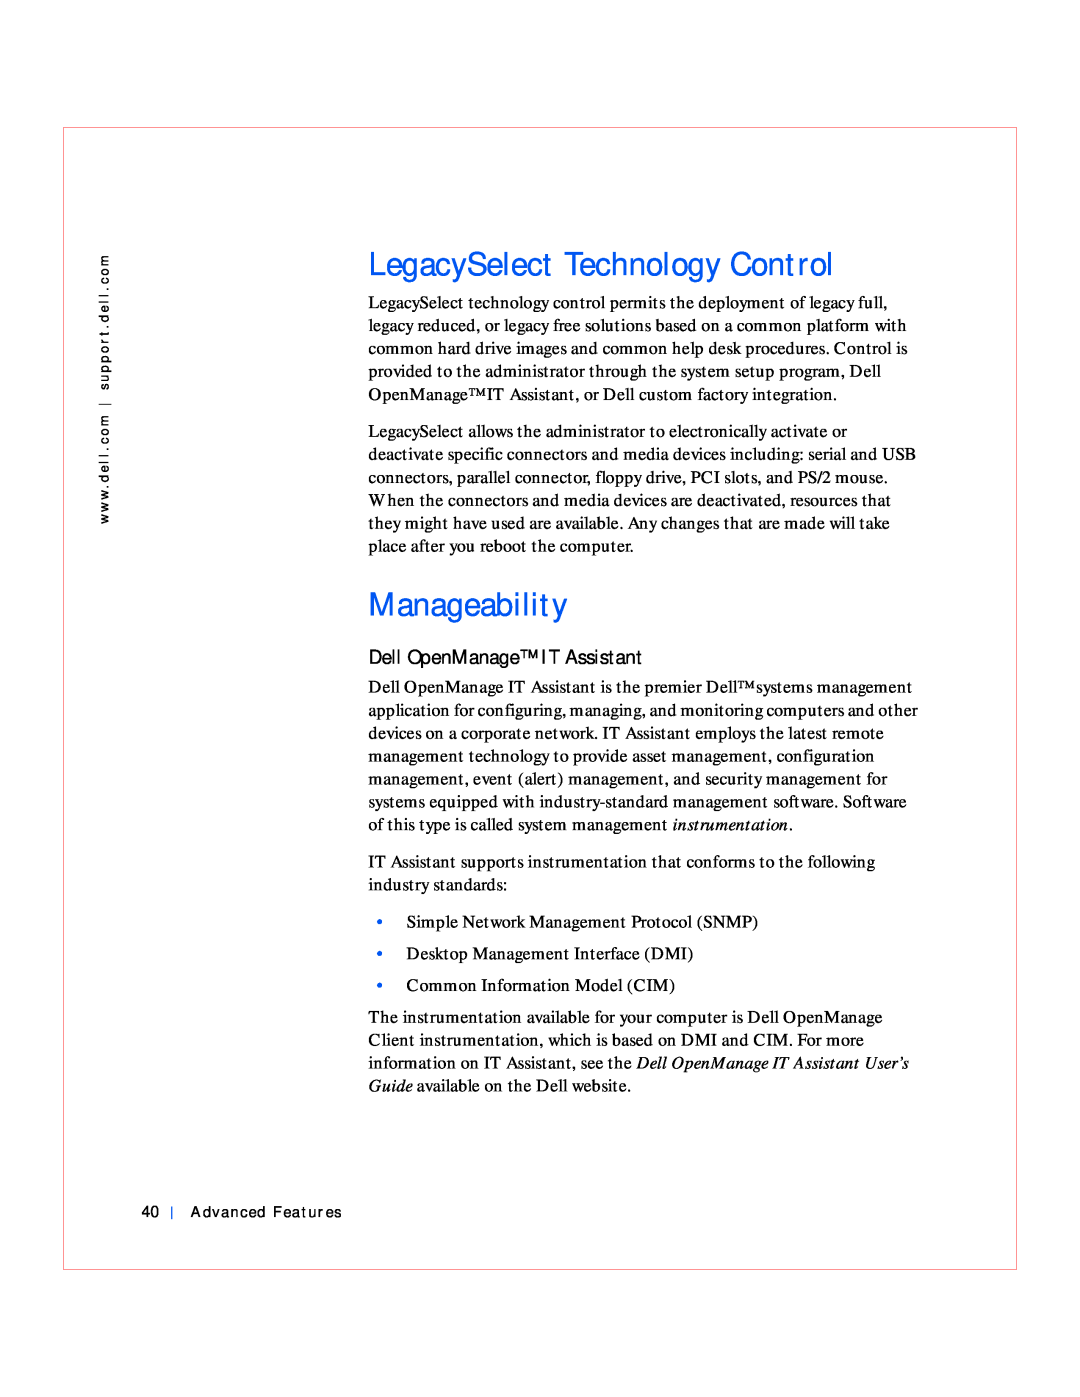 Dell GX240 manual LegacySelect Technology Control, Manageability, Dell OpenManage IT Assistant 